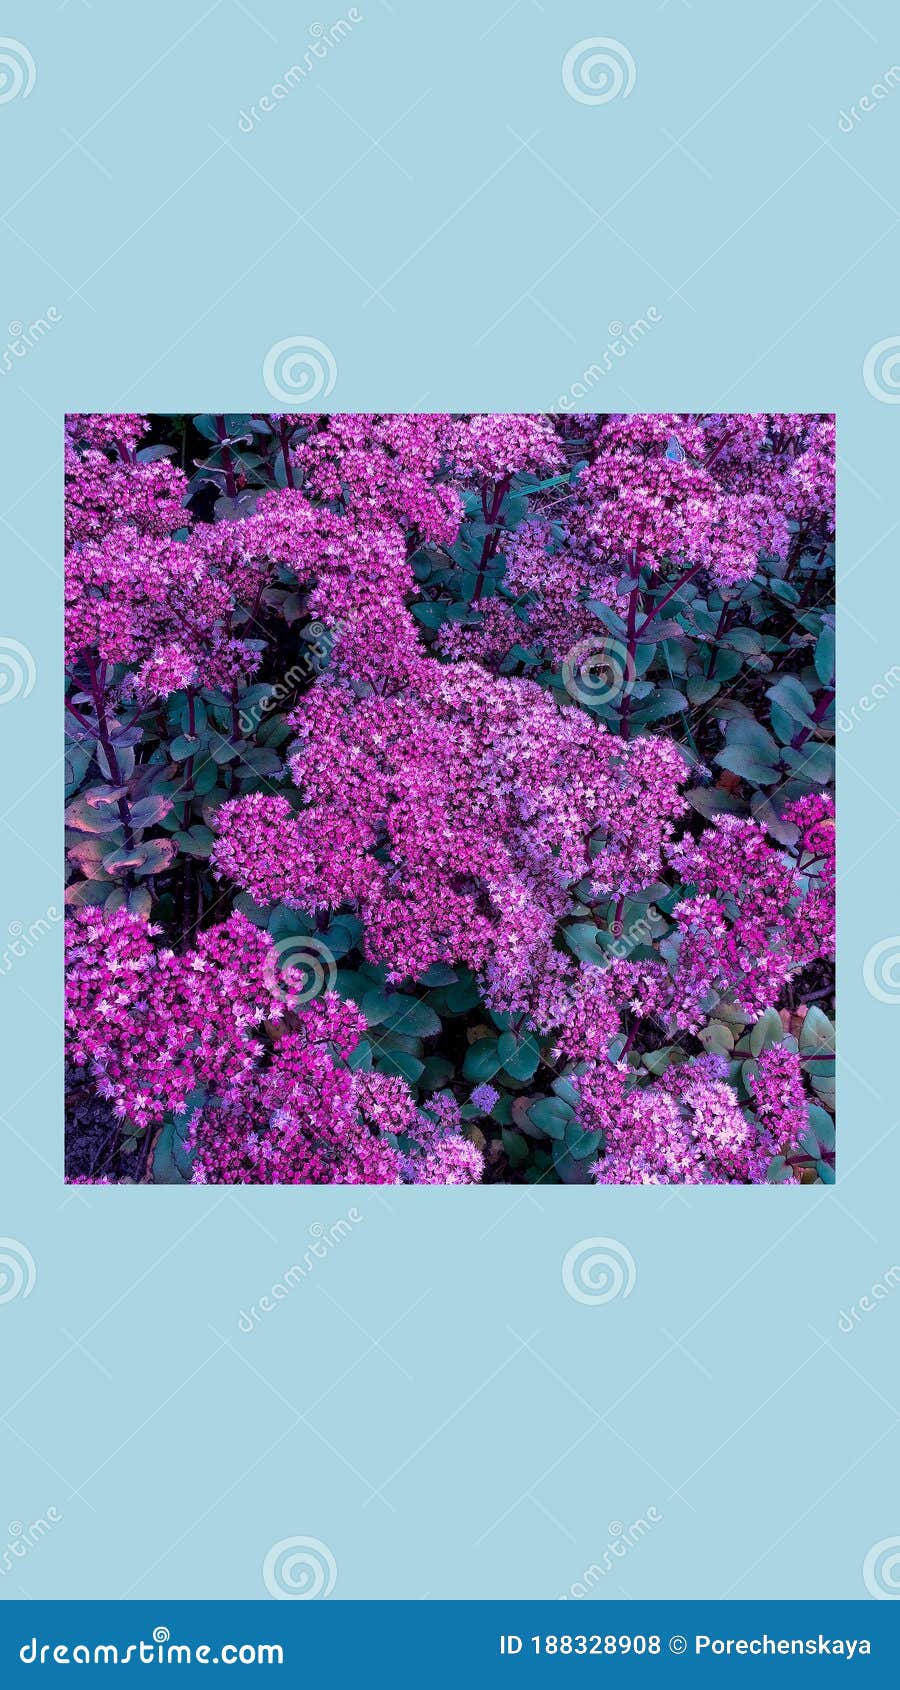 1 568 Bloom Aesthetic Photos Free Royalty Free Stock Photos From Dreamstime